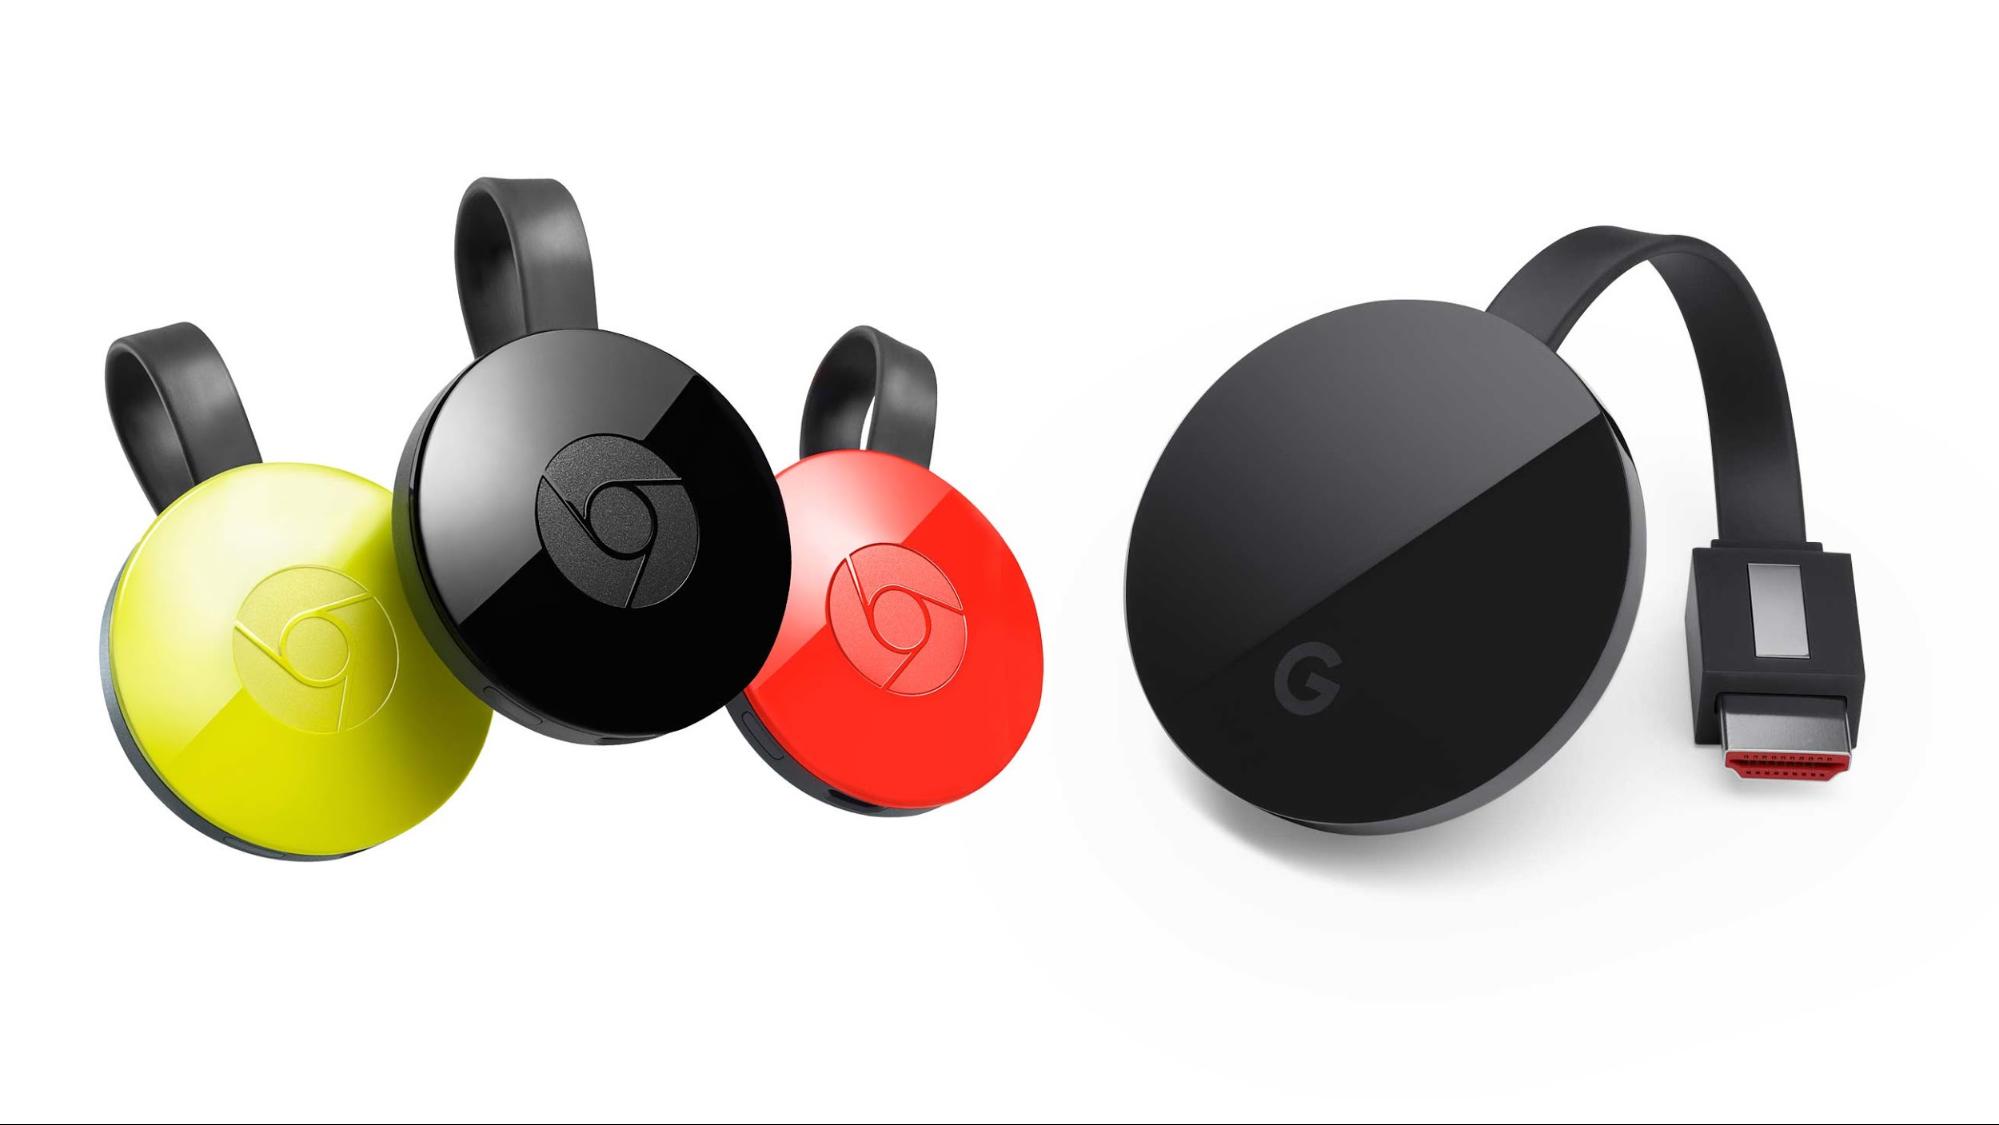 Fedt to uger alien The new Chromecast Ultra vs the old Chromecast: what's changed | TechRadar